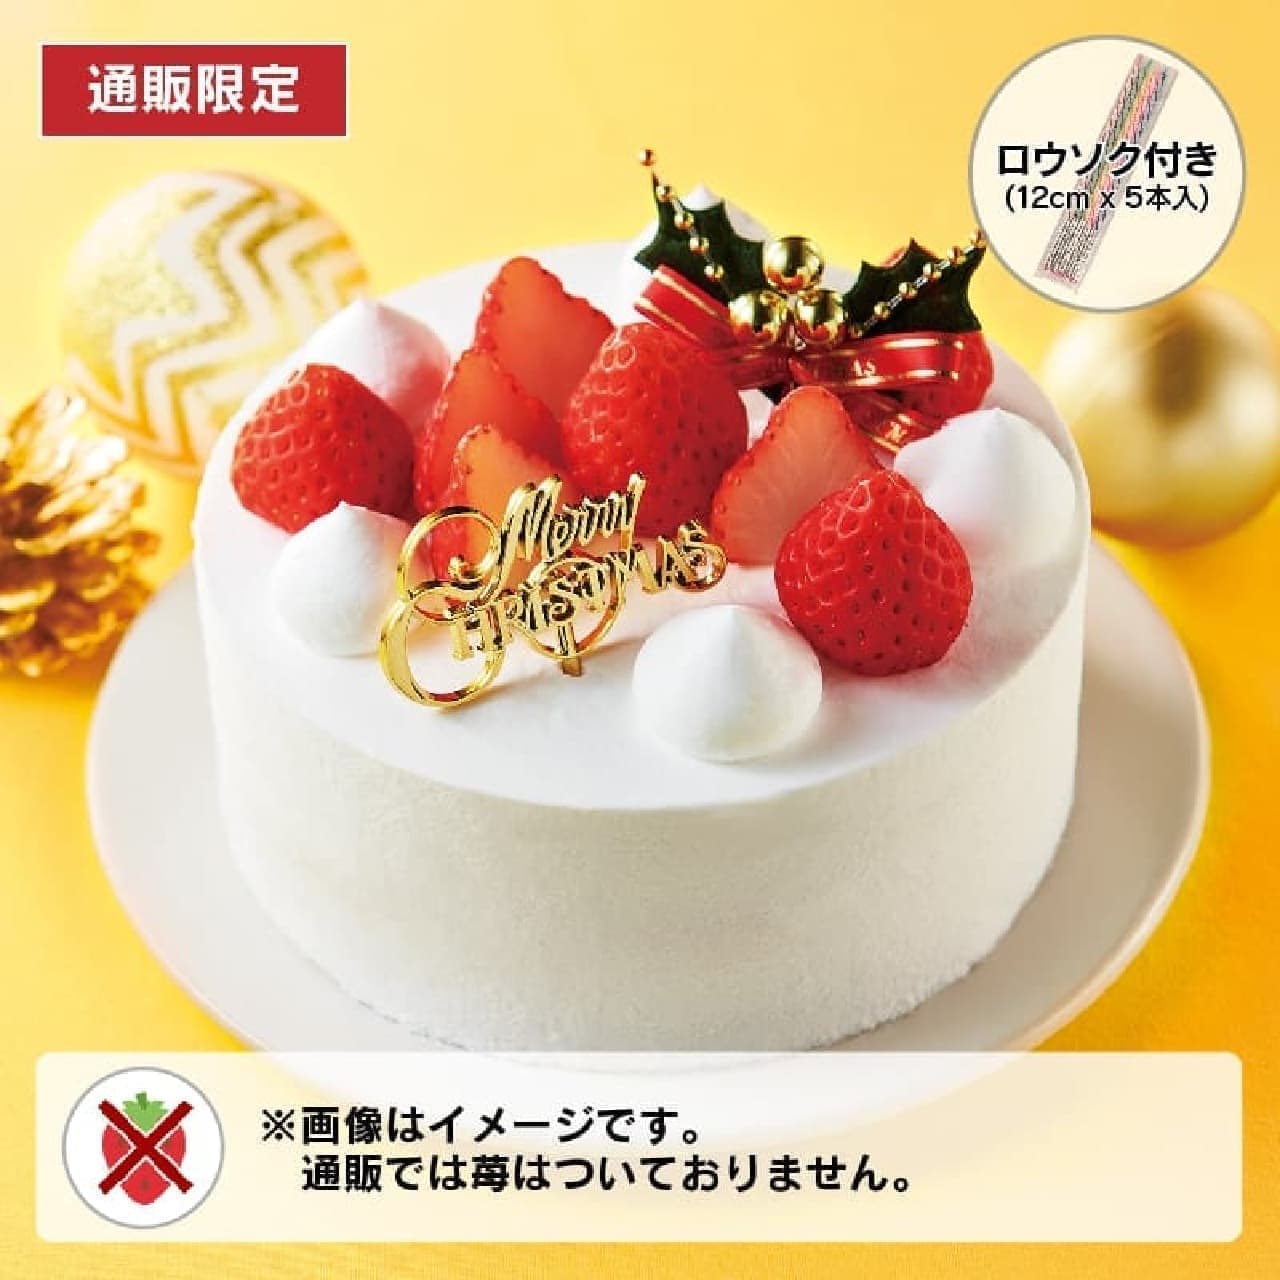 Chateraise "[Mail order] 70% cut sugar Xmas decoration 14cm (without strawberries)